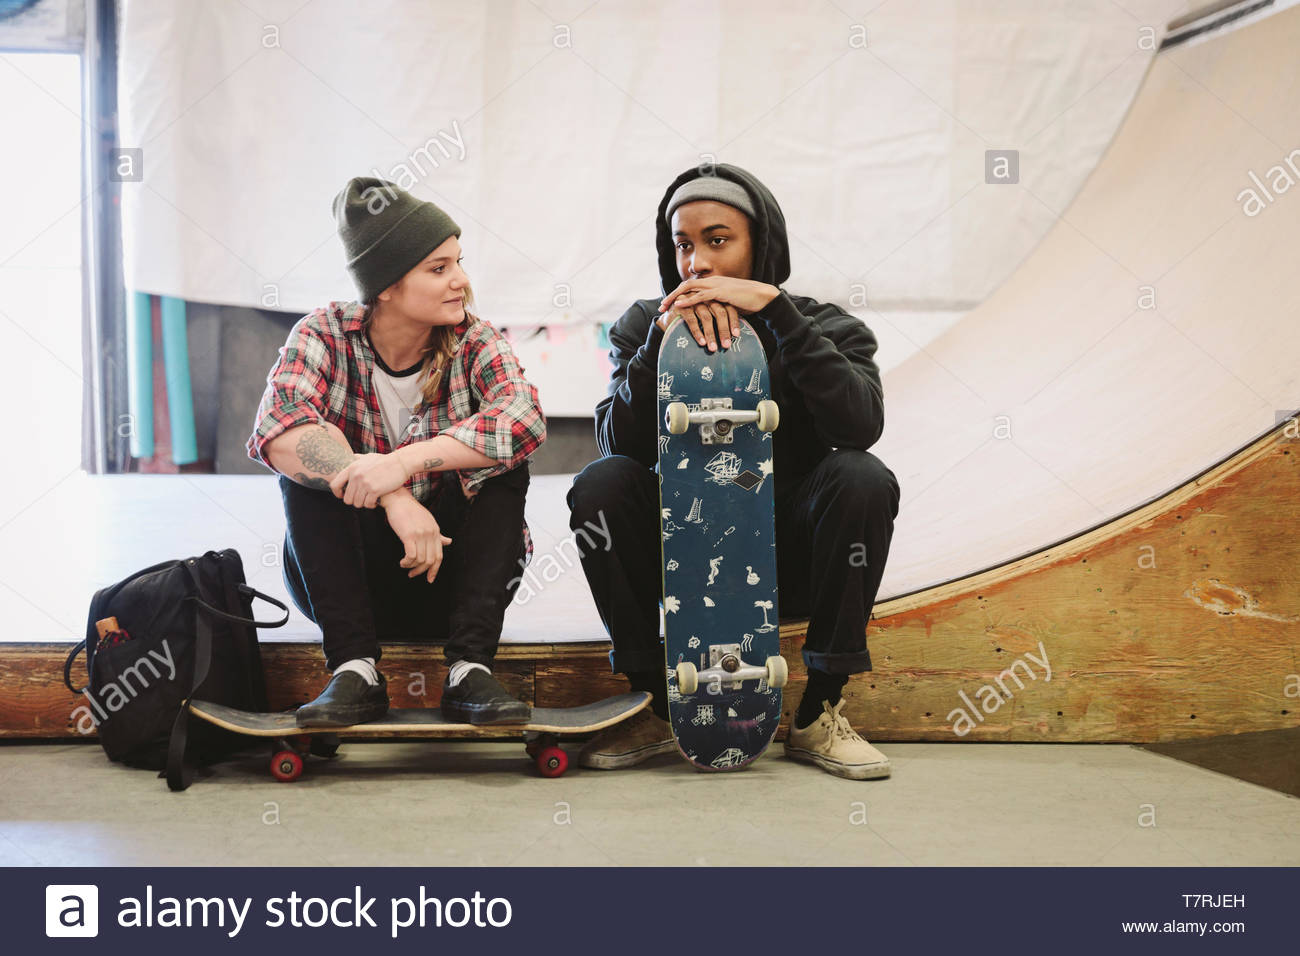 Young skateboarders talking at indoor skate park Stock Photo